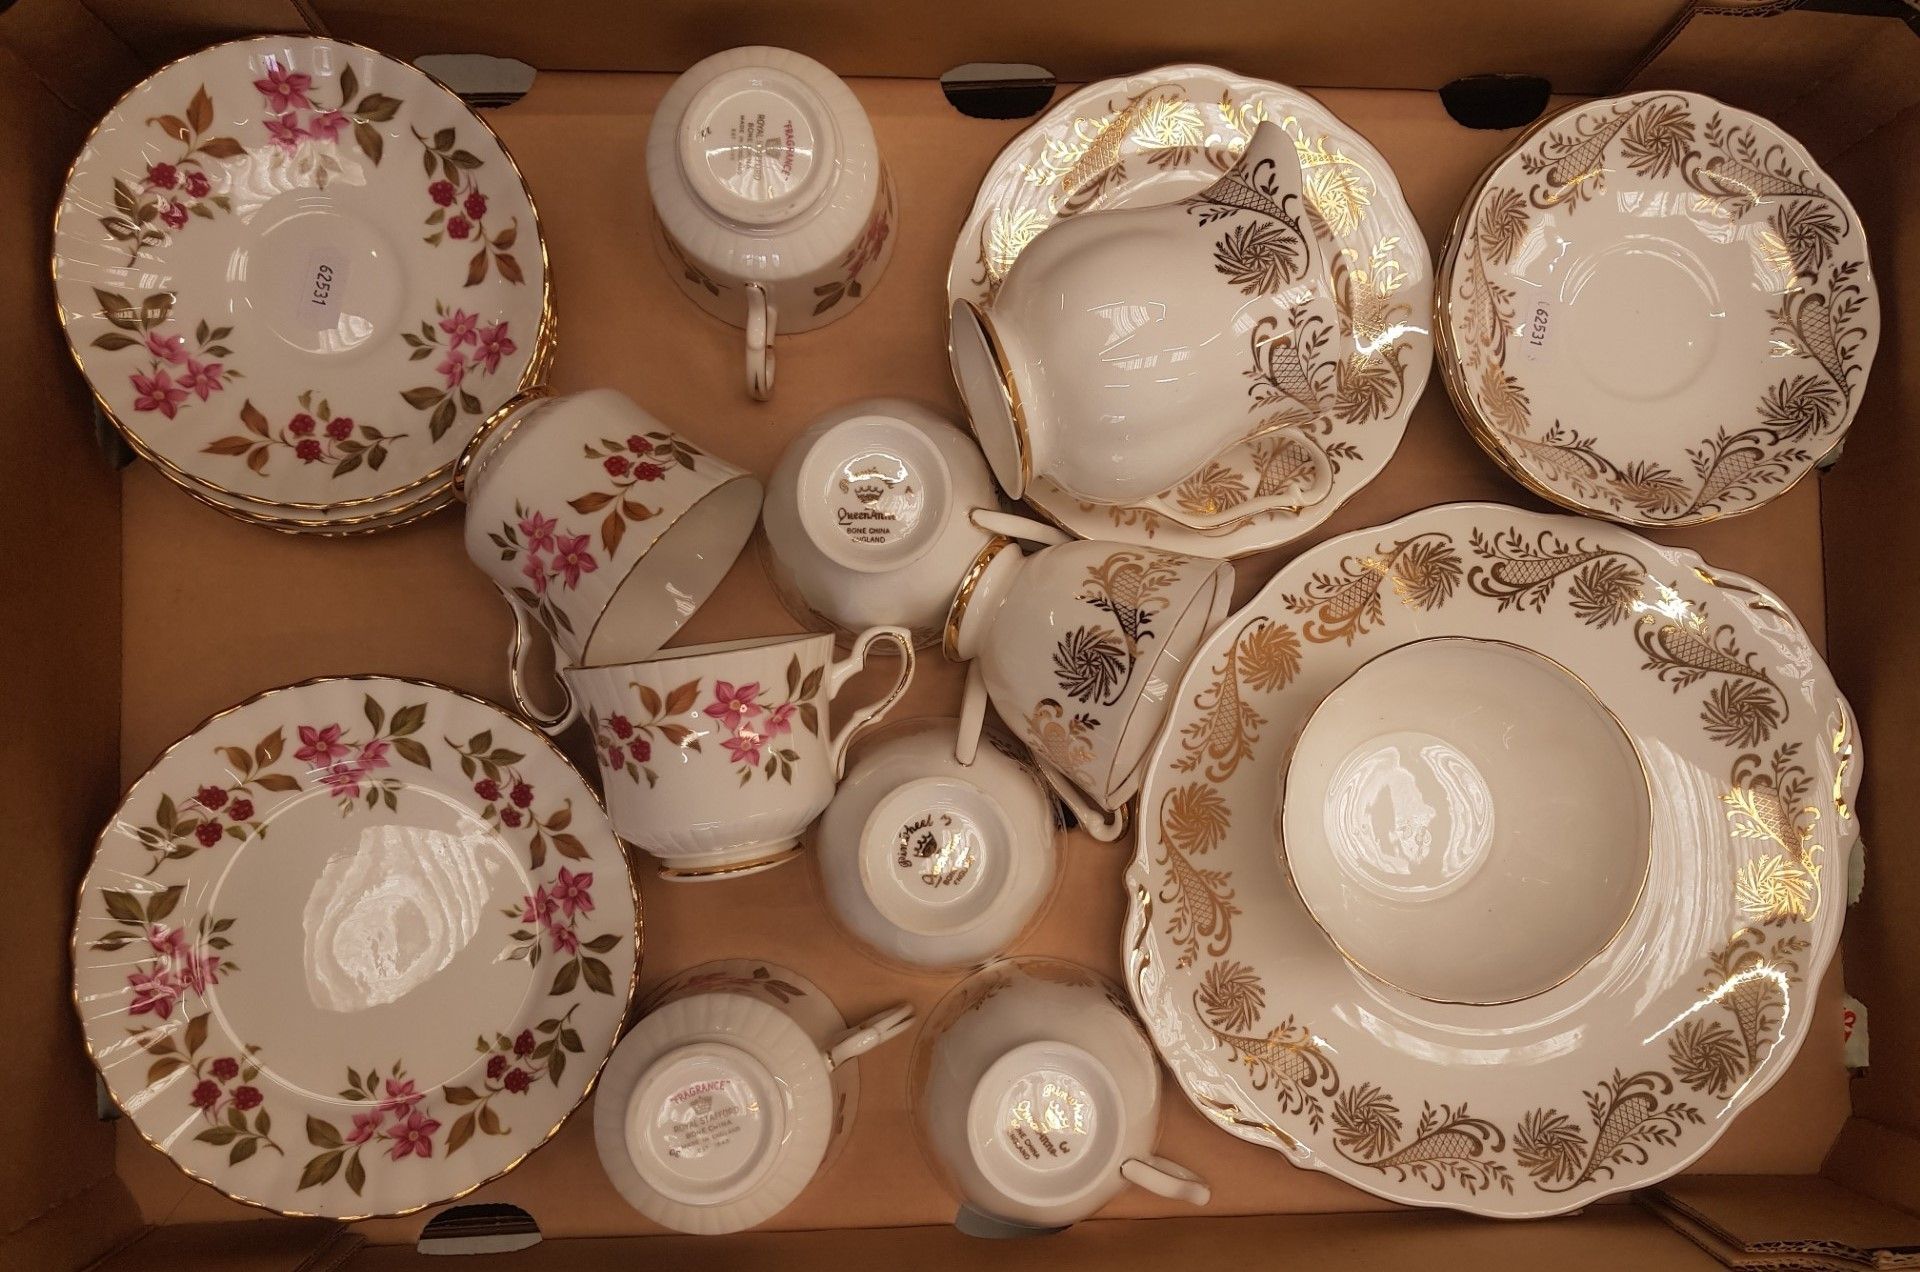 Queen Anne 15-piece tea set together with Royal Stafford Fragrance pattern trio's x 4 (1 tray).